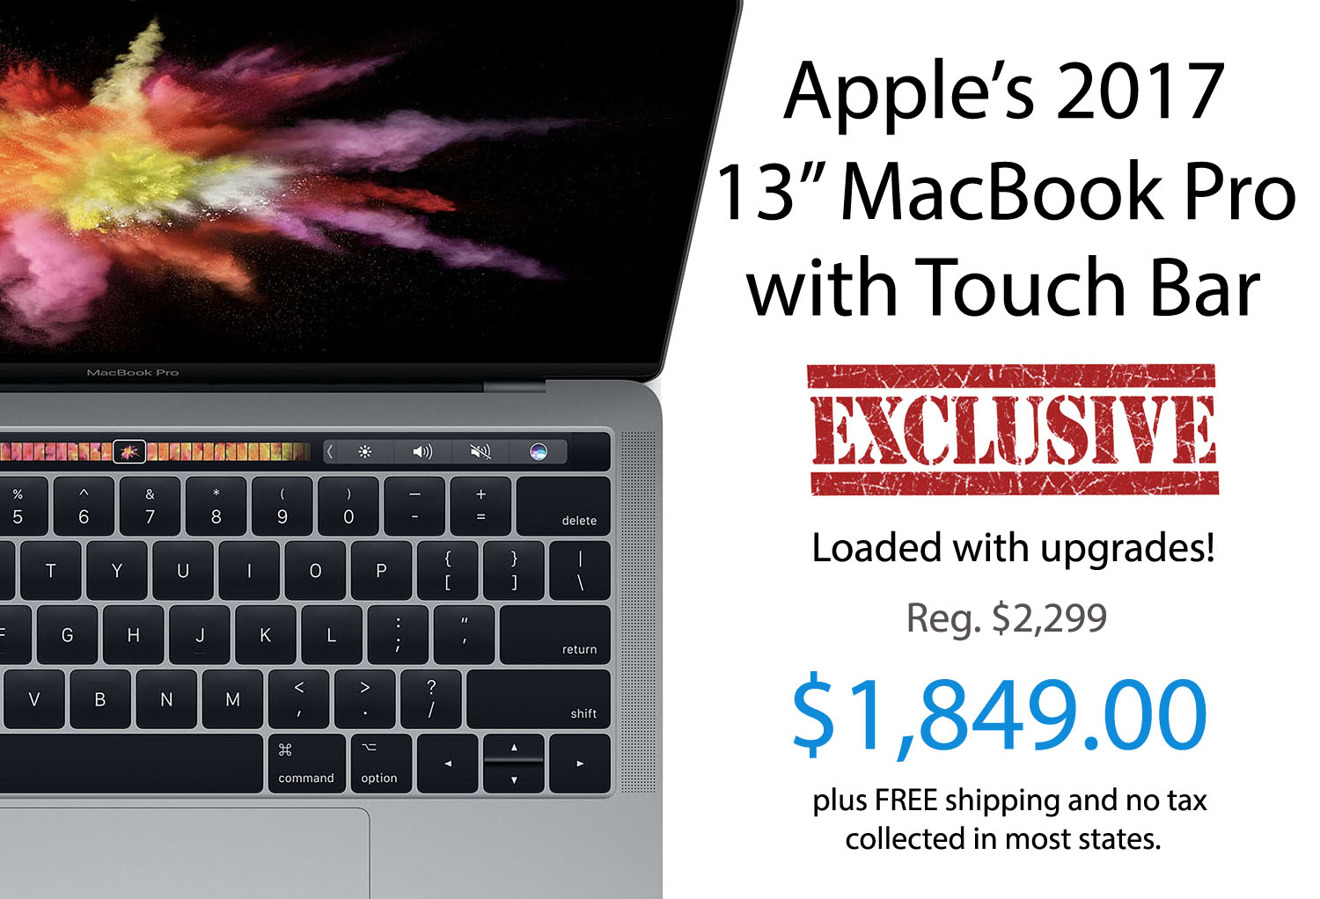 Apple 13 inch MacBook Pro with Touch Bar on sale